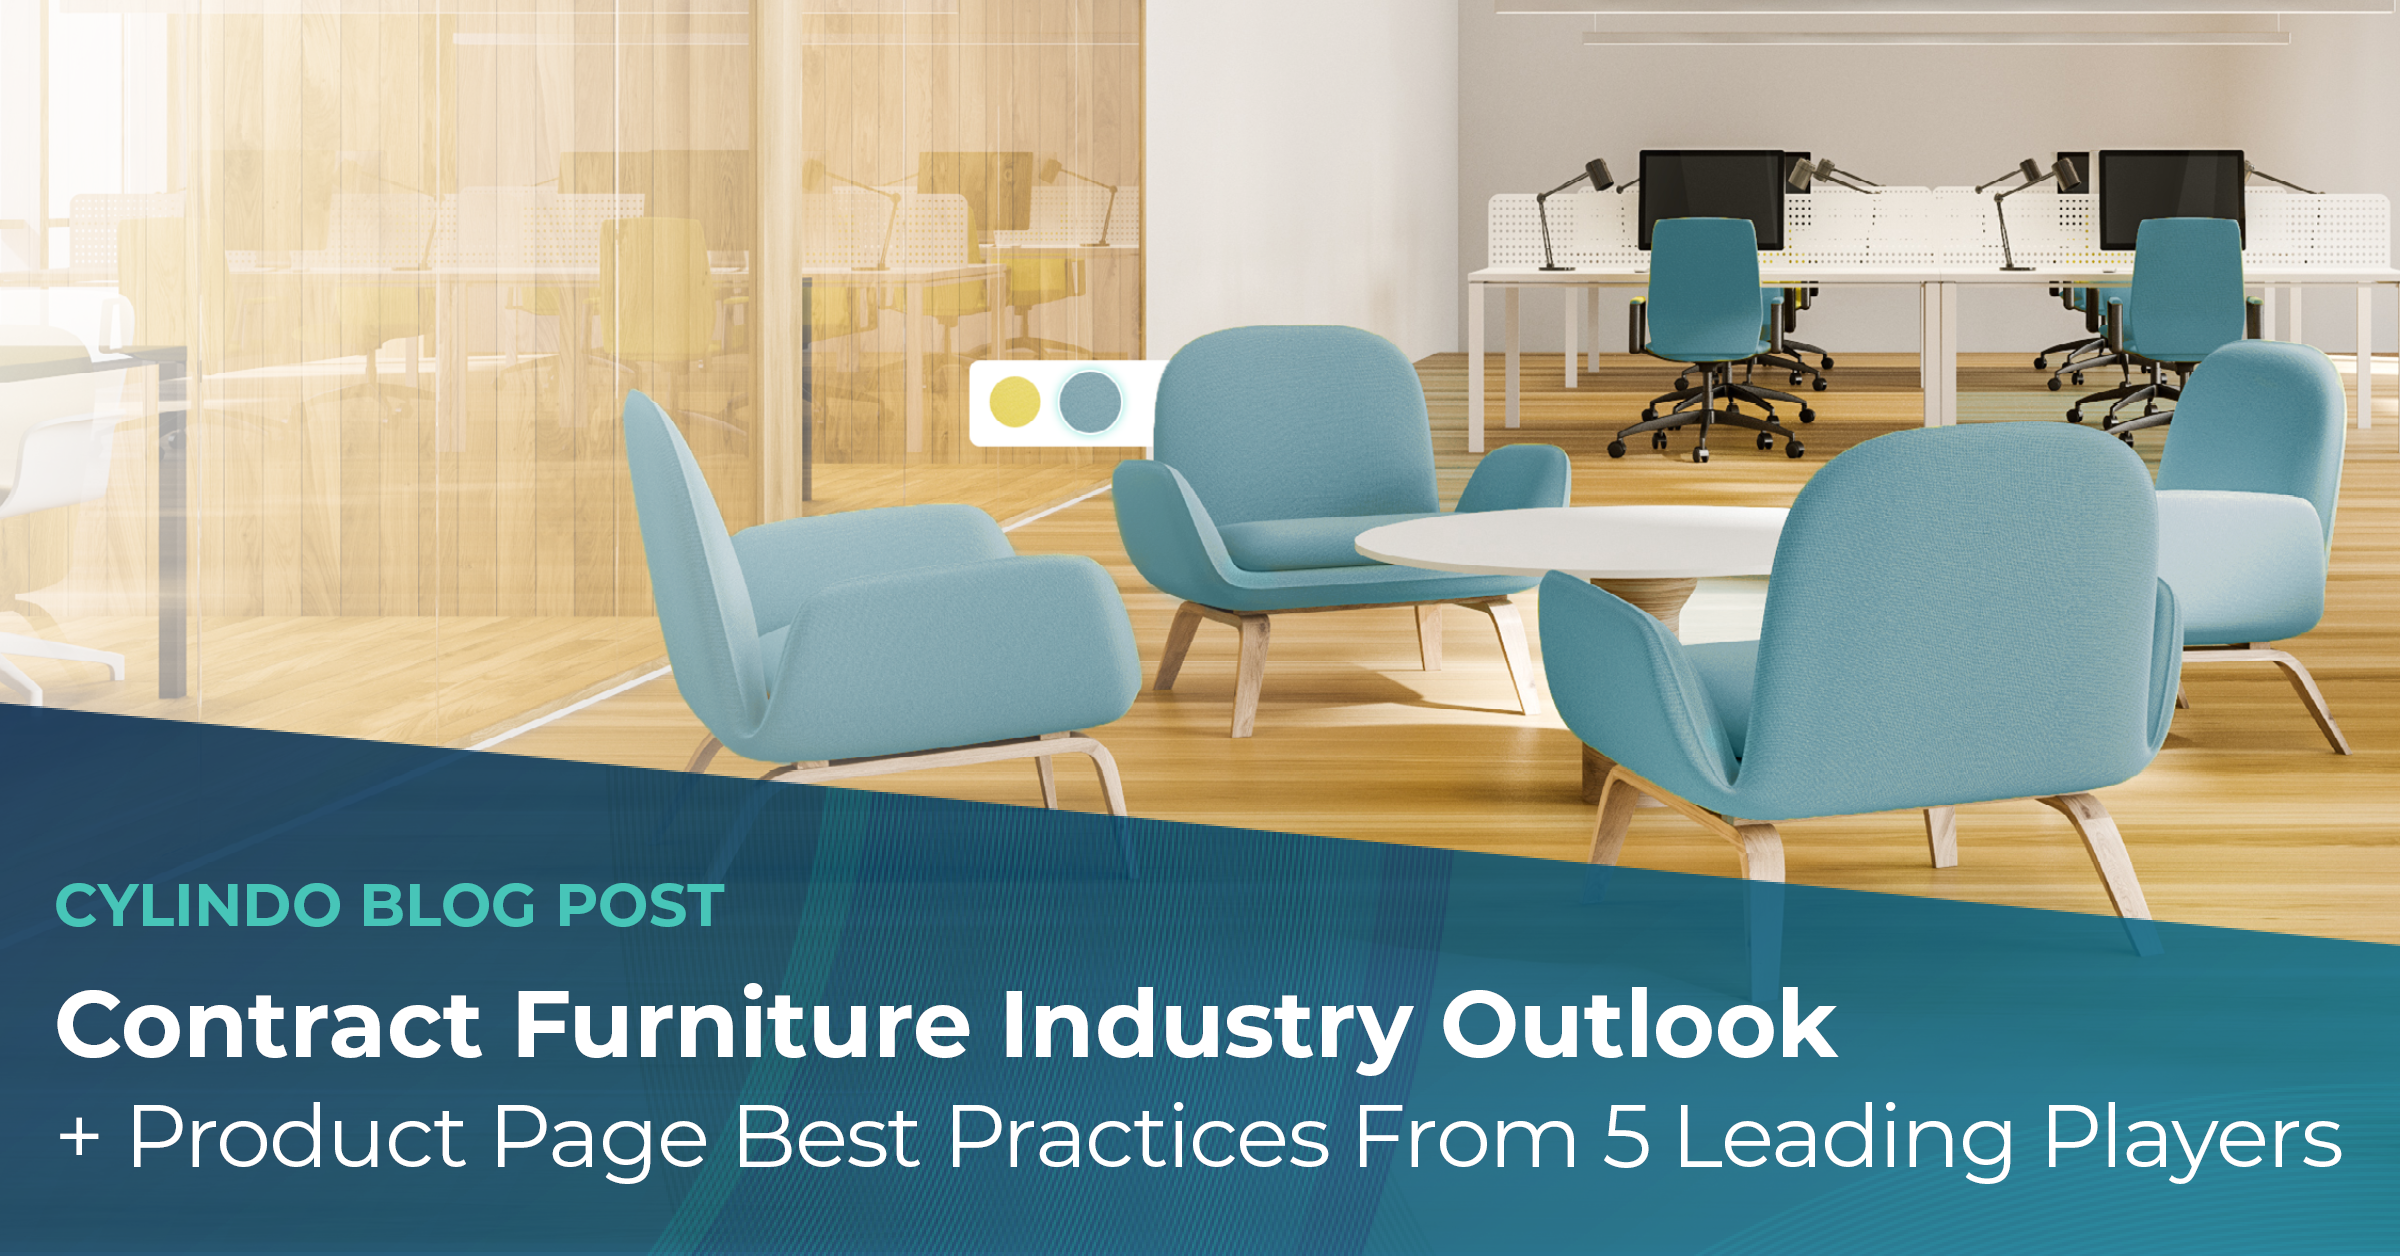 Contract Furniture Industry Outlook + Product Page Best Practices From 5 Leading Players